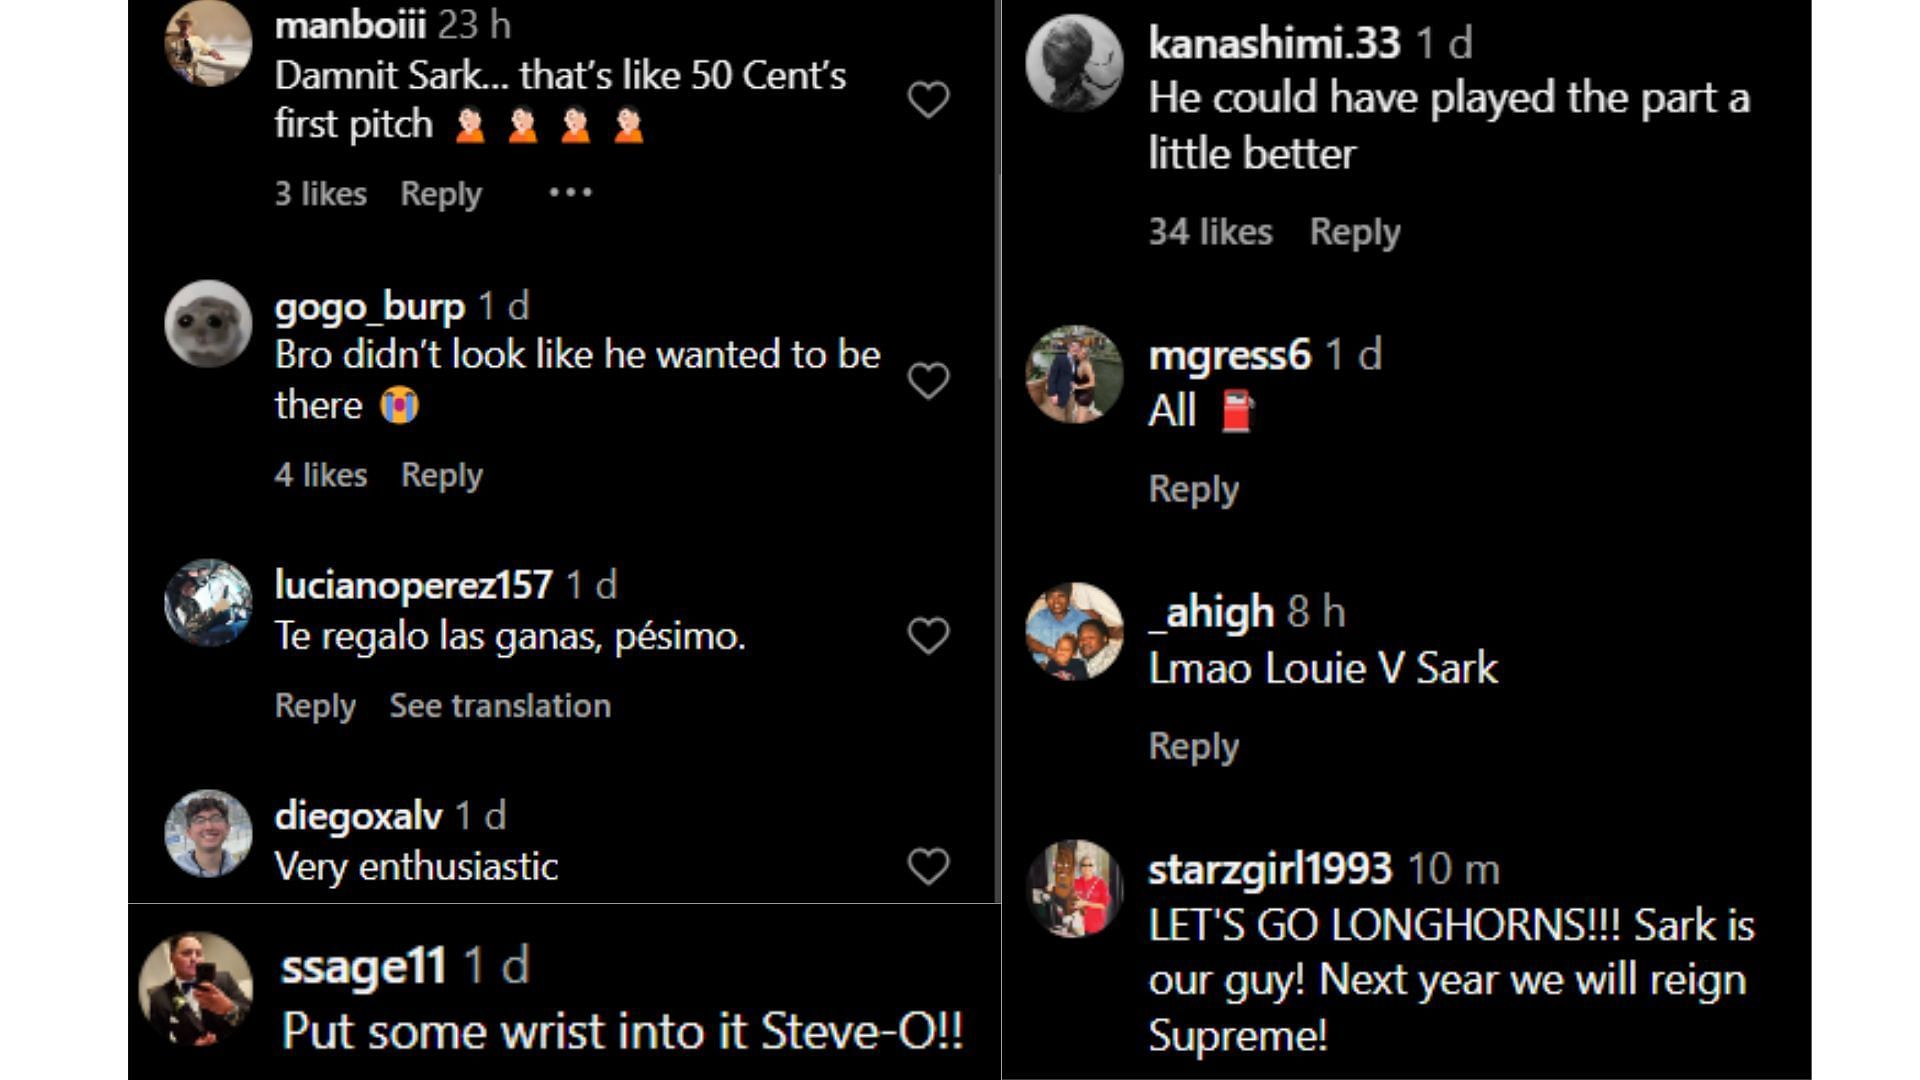 Fans call for Steve Sarkisian to put in more effort.